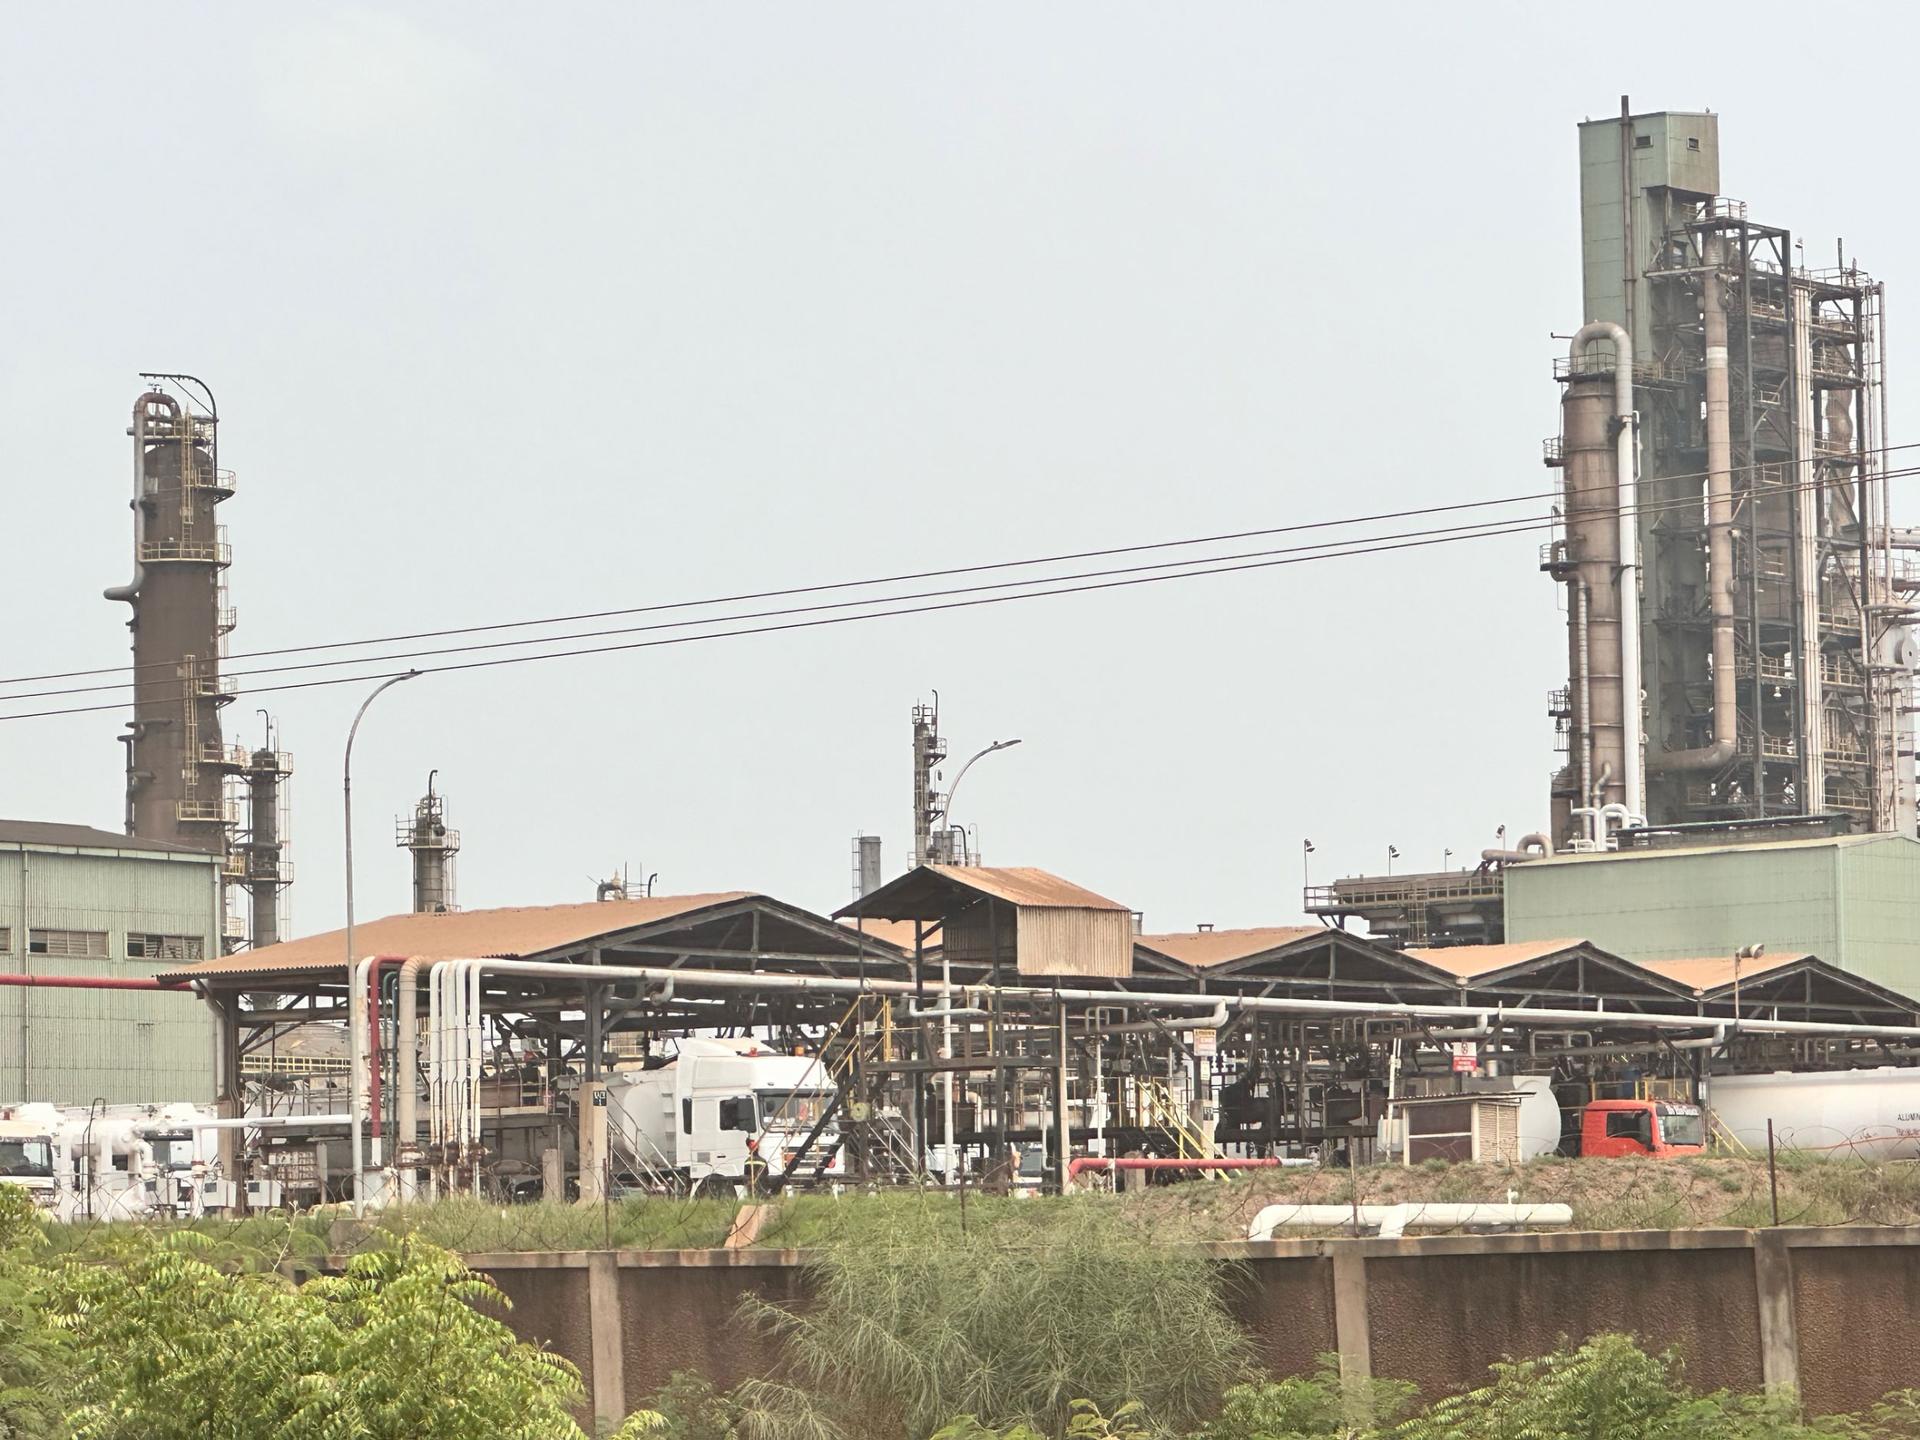 The industrial hub of Tema, Ghana, is home to steel processing, oil refinery, processing, aluminum industries, and more.